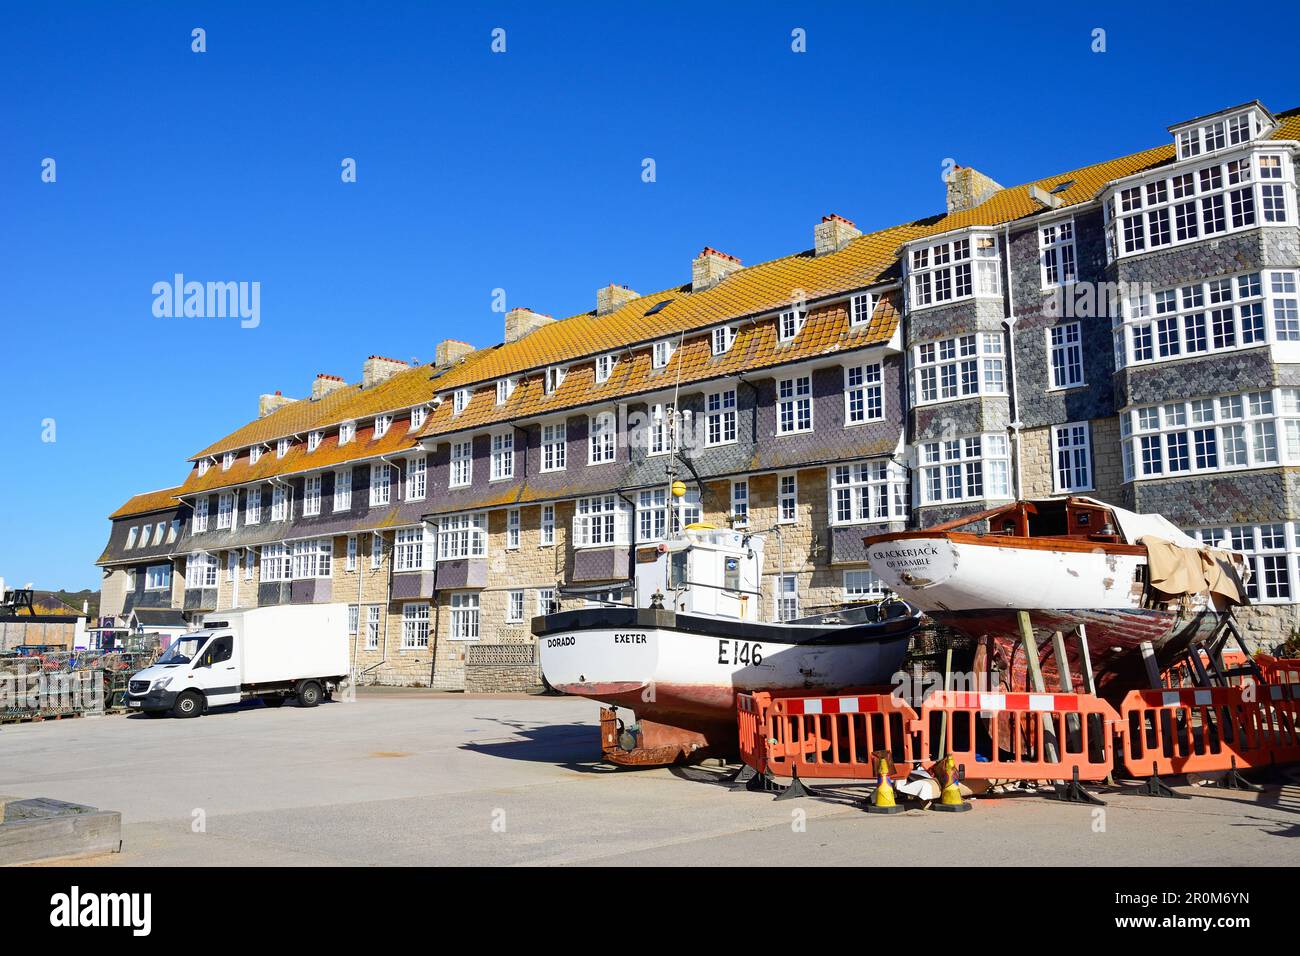 Boats in dry dock on the harbourside with apartments to the rear, West Bay, Dorset, UK, Europe. Stock Photo